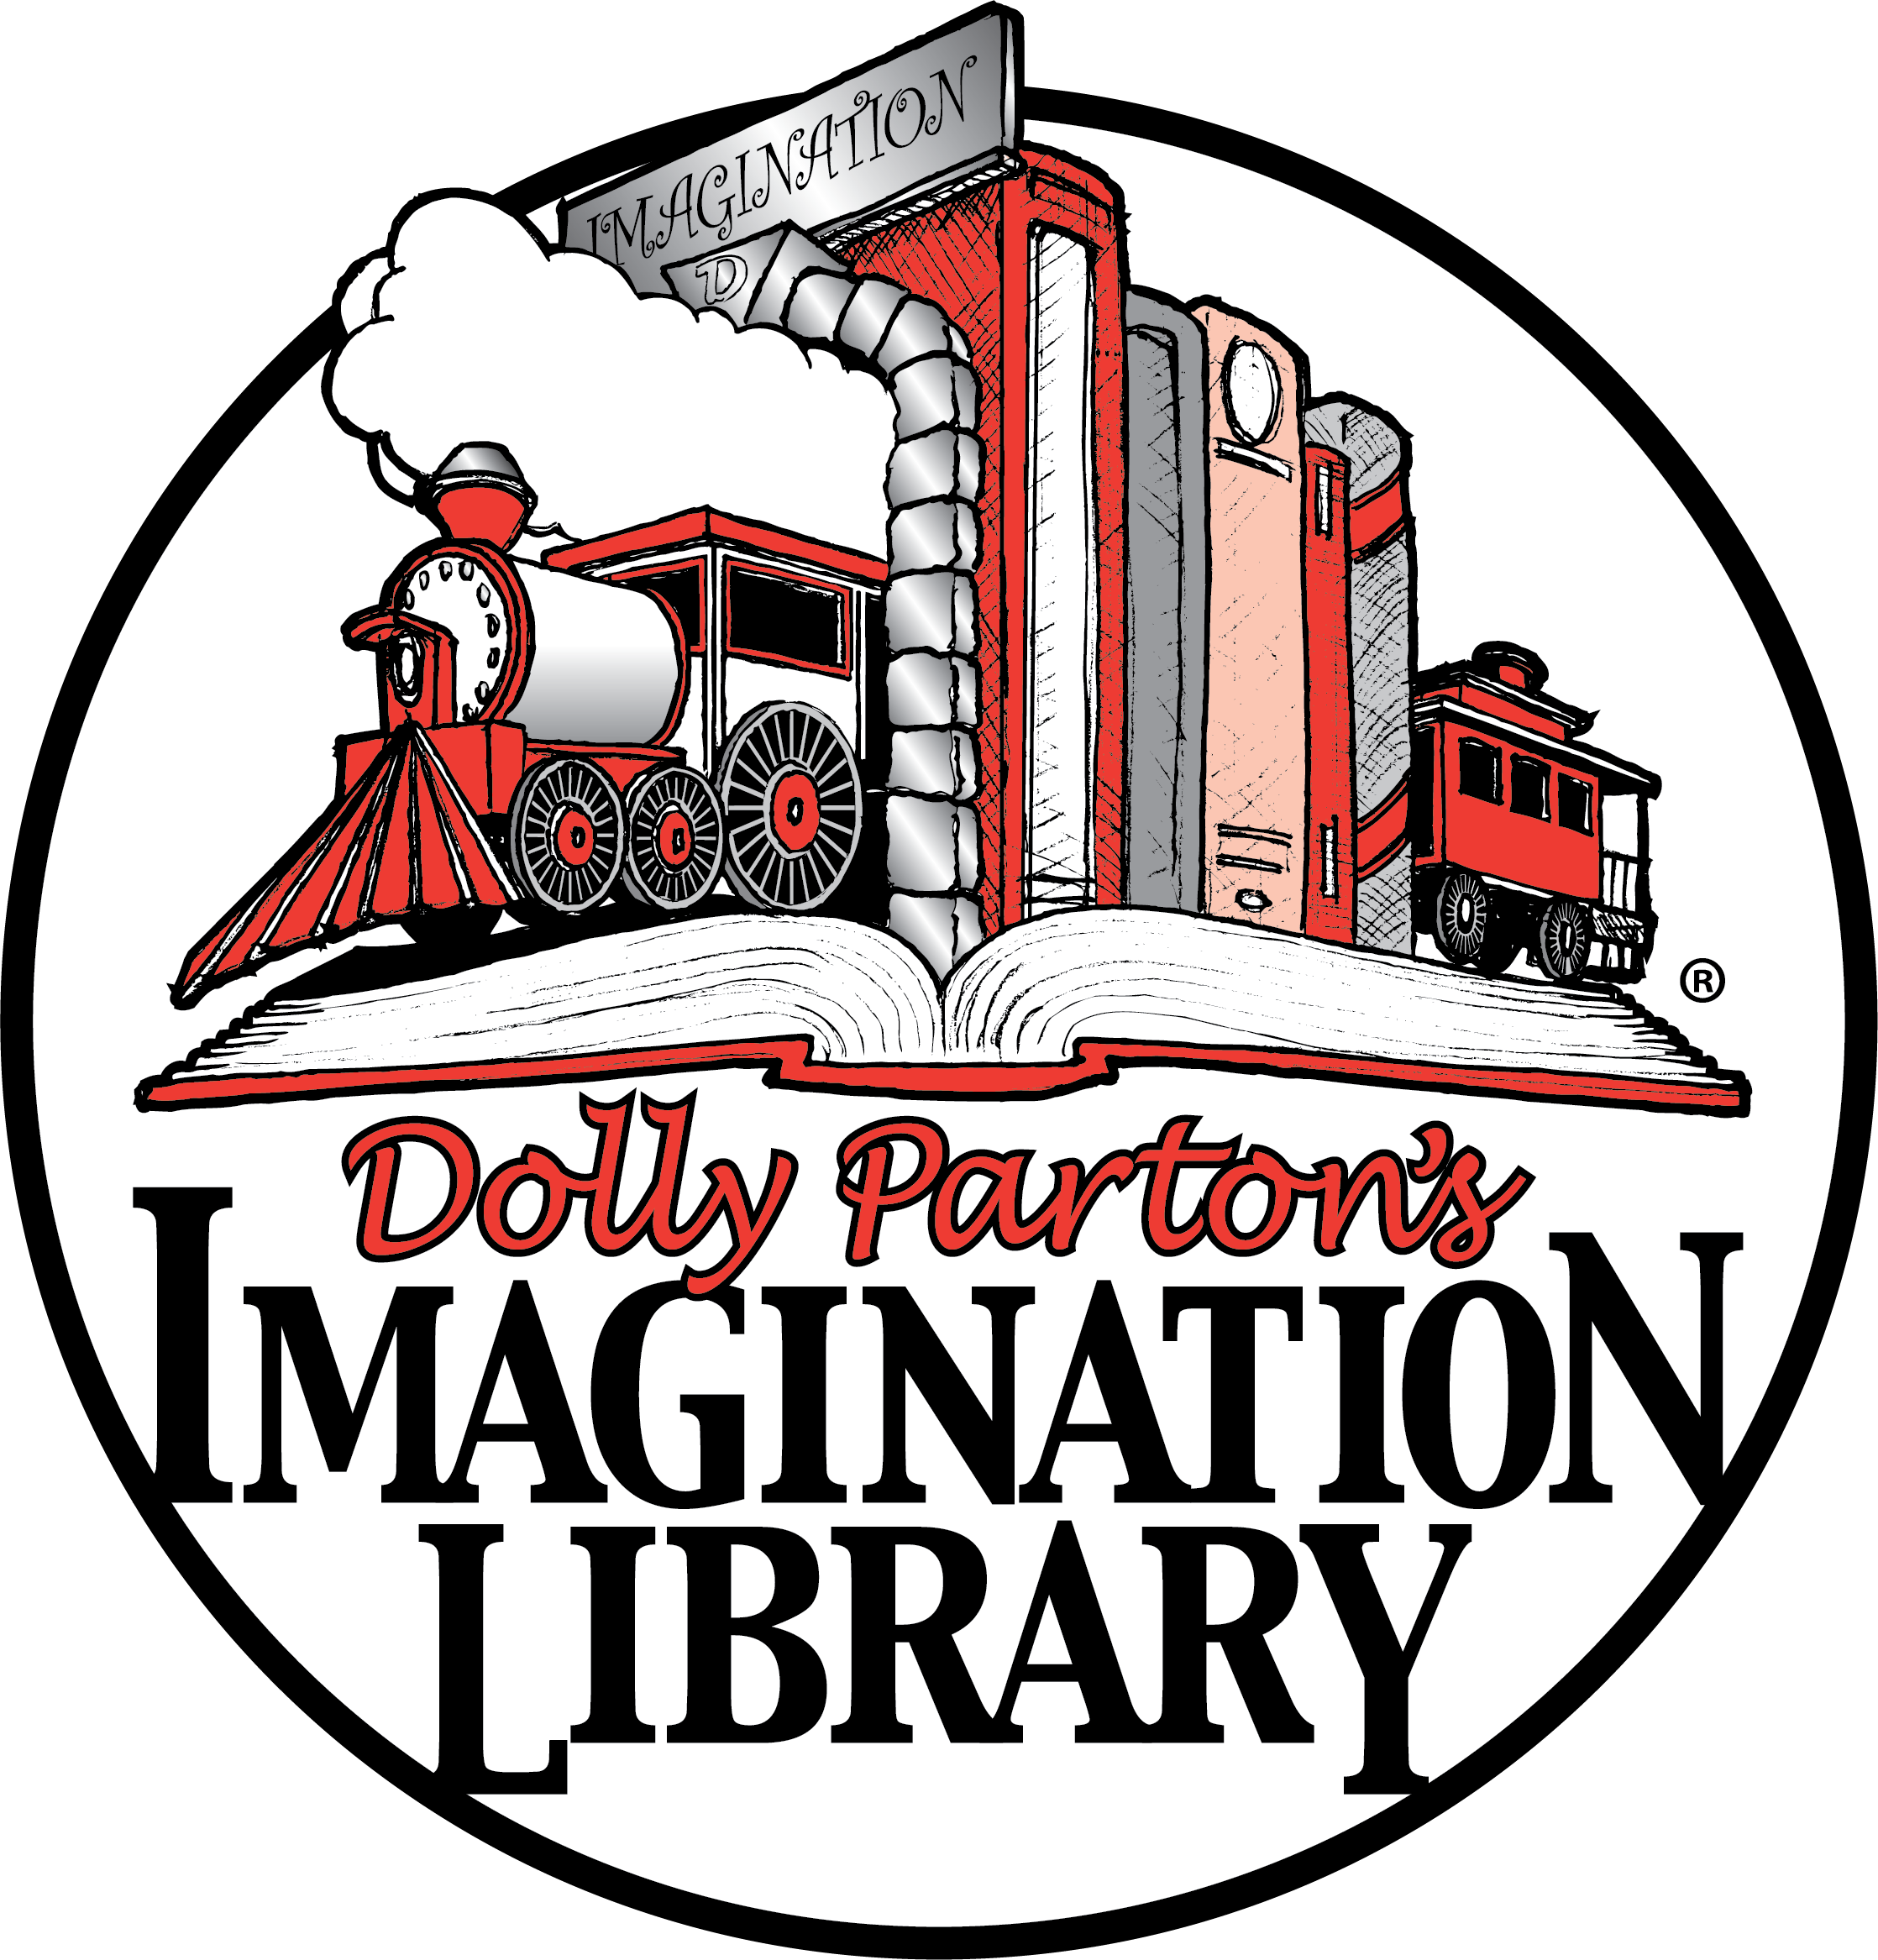 Logo shows a circle with red and black train and words Dolly Parton's Imagination Library